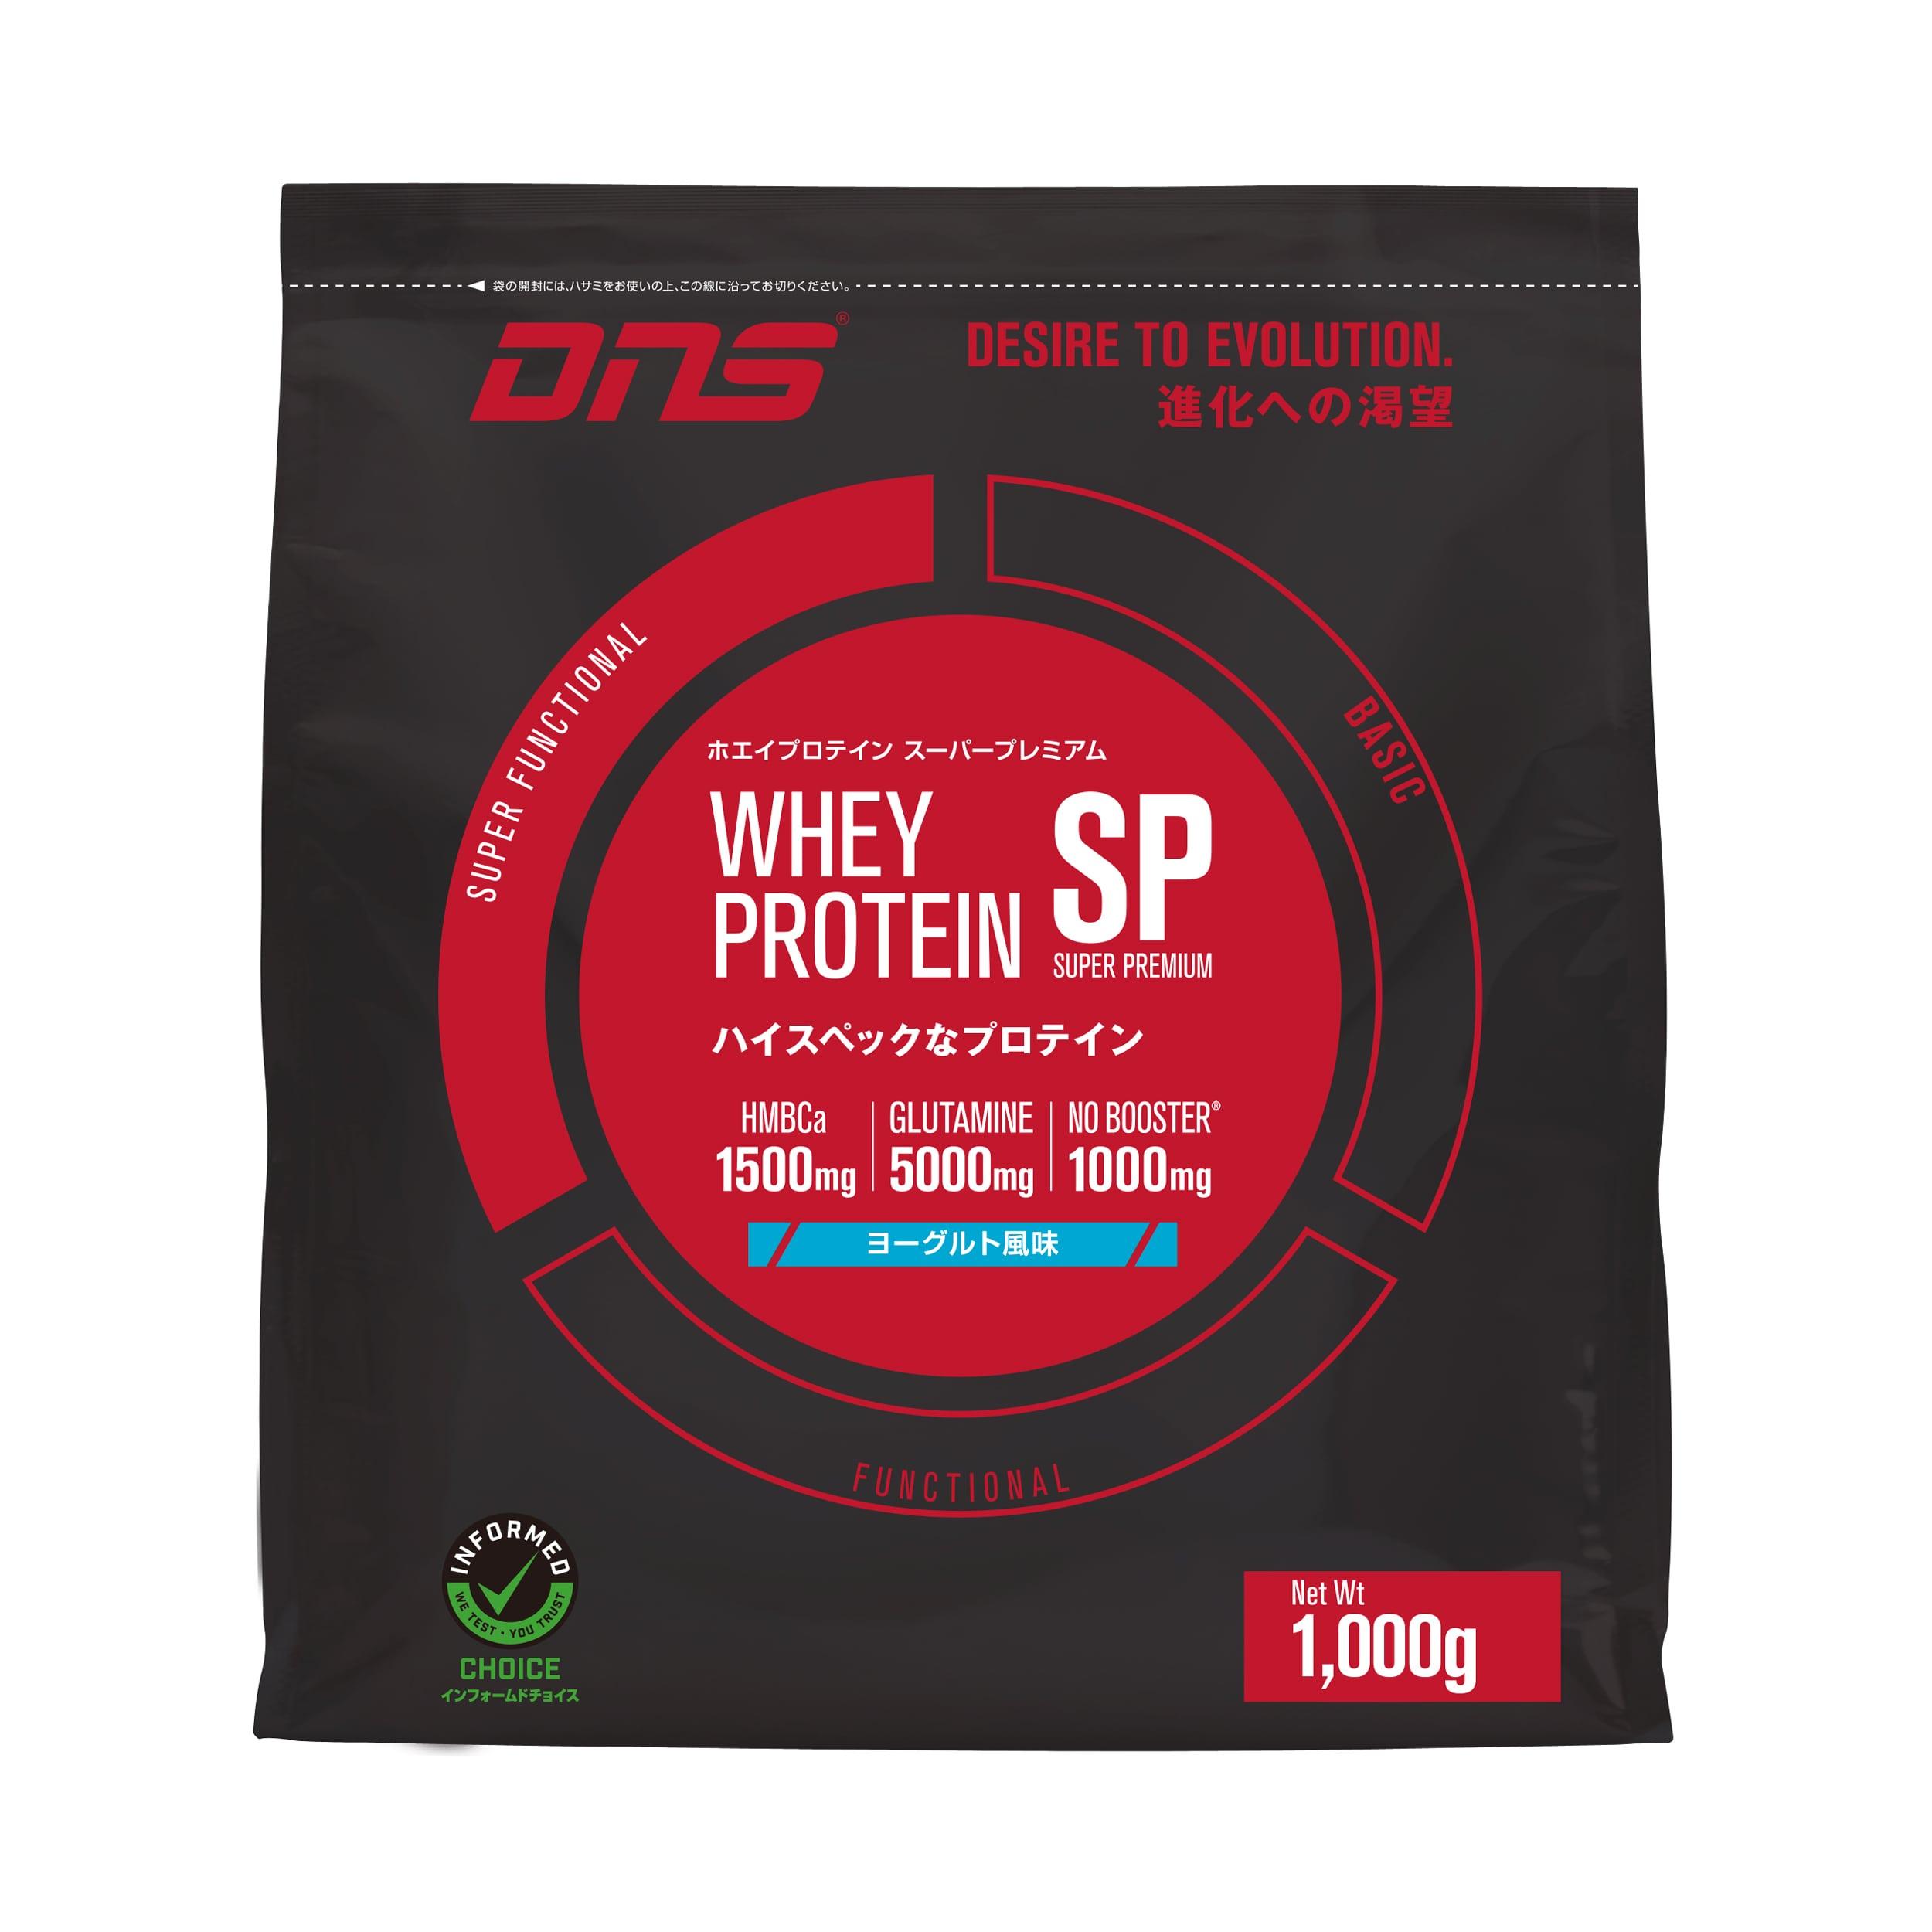 Whey Protein SP | Informed Choice